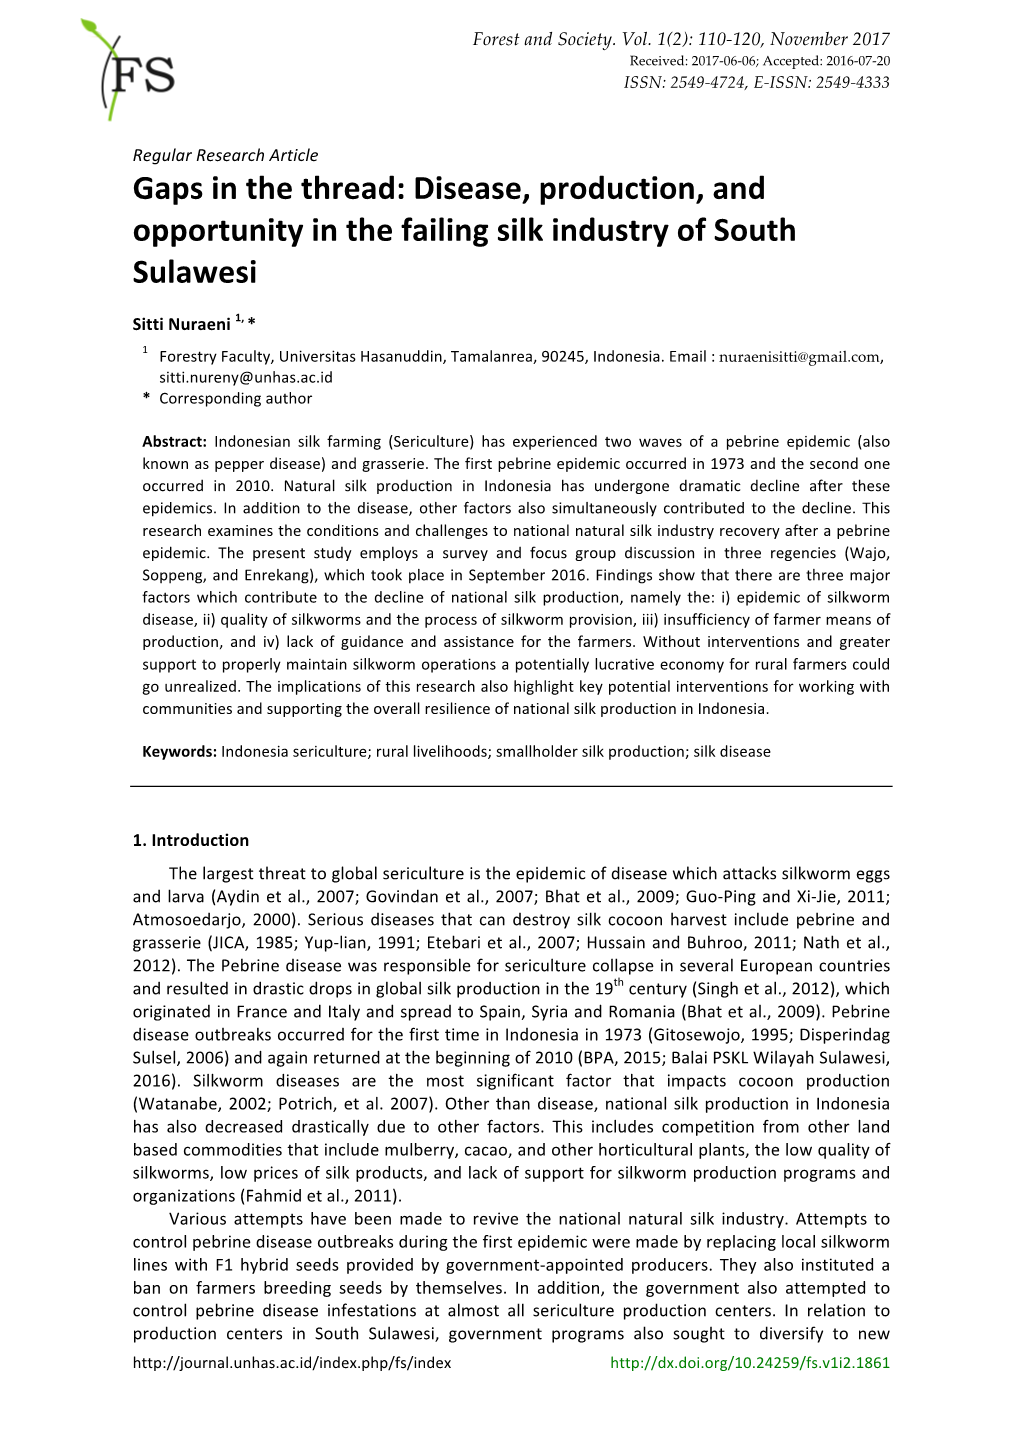 Gaps in the Thread: Disease, Production, and Opportunity in the Failing Silk Industry of South Sulawesi